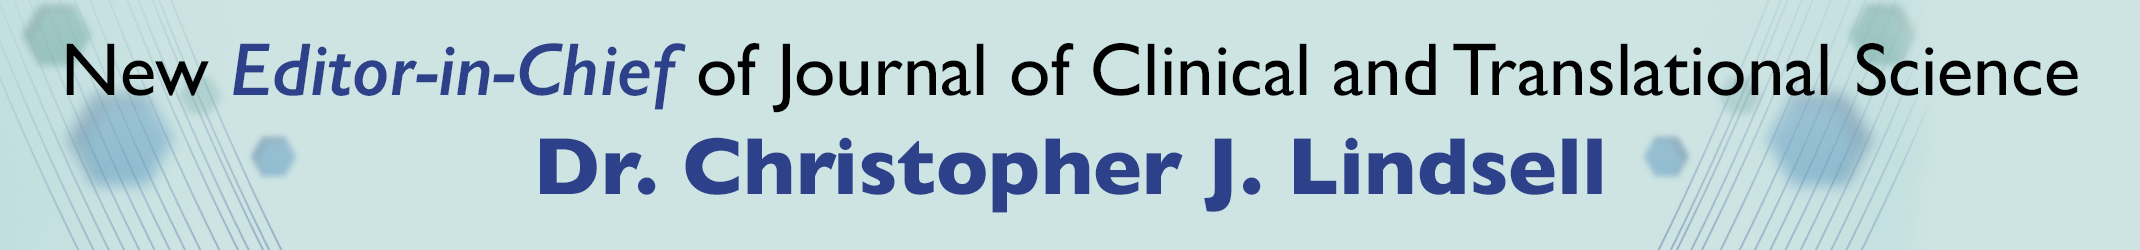 New Editor-in-Chief - Dr. Christopher J. Lindsell